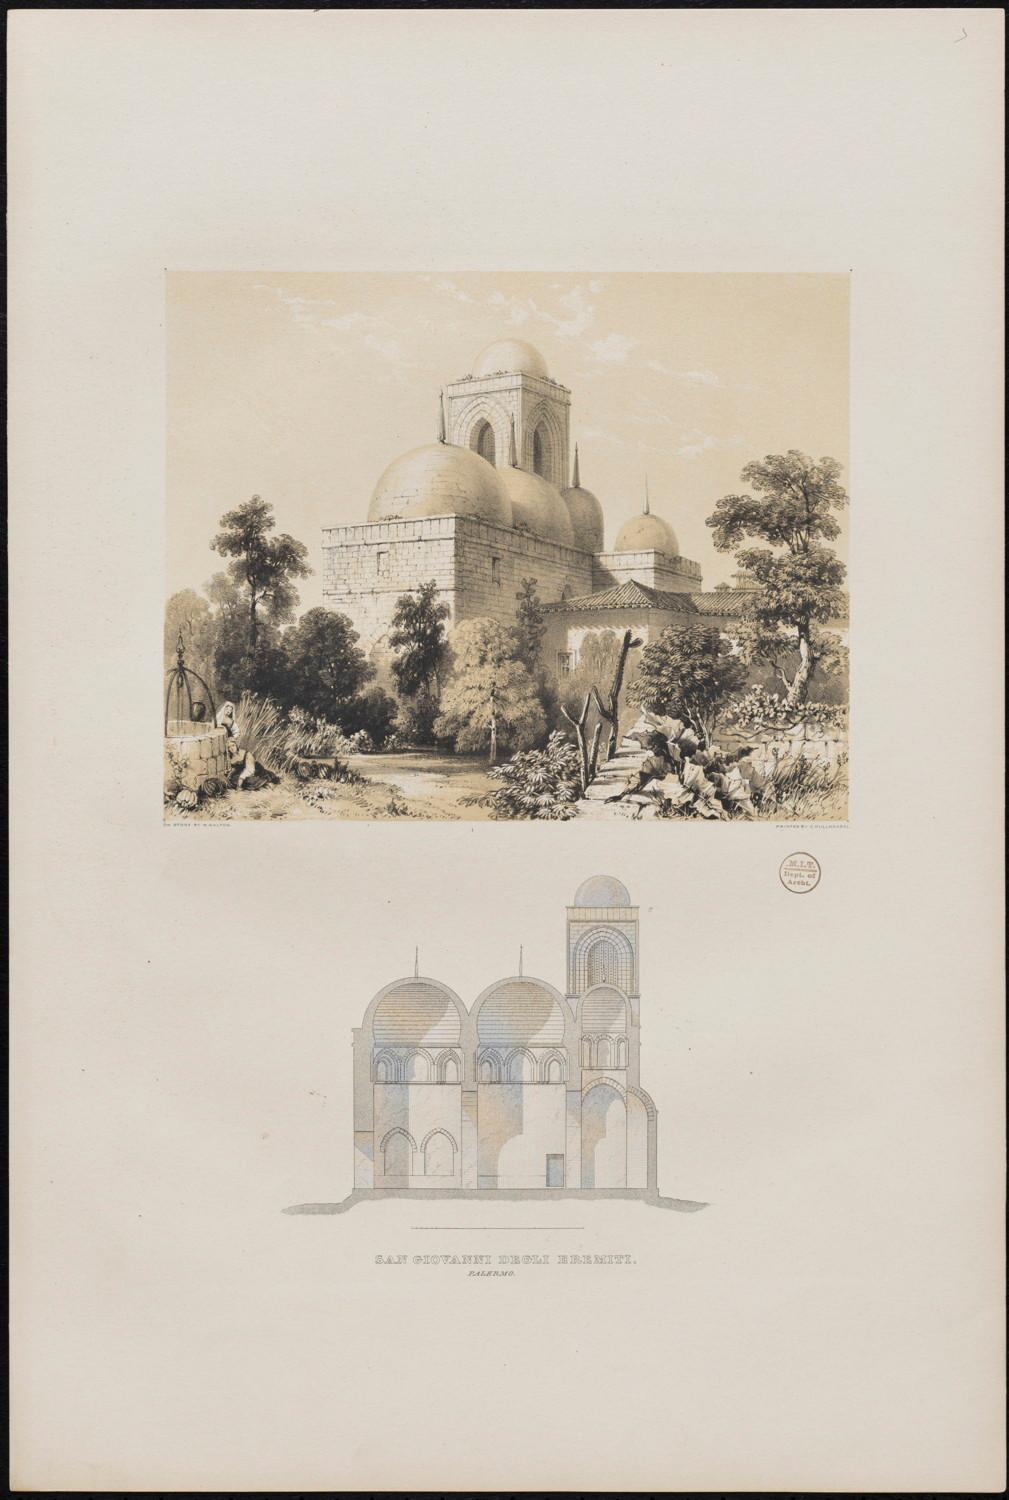 Lithograph of of exterior and section of San Giovanni degli Eremiti